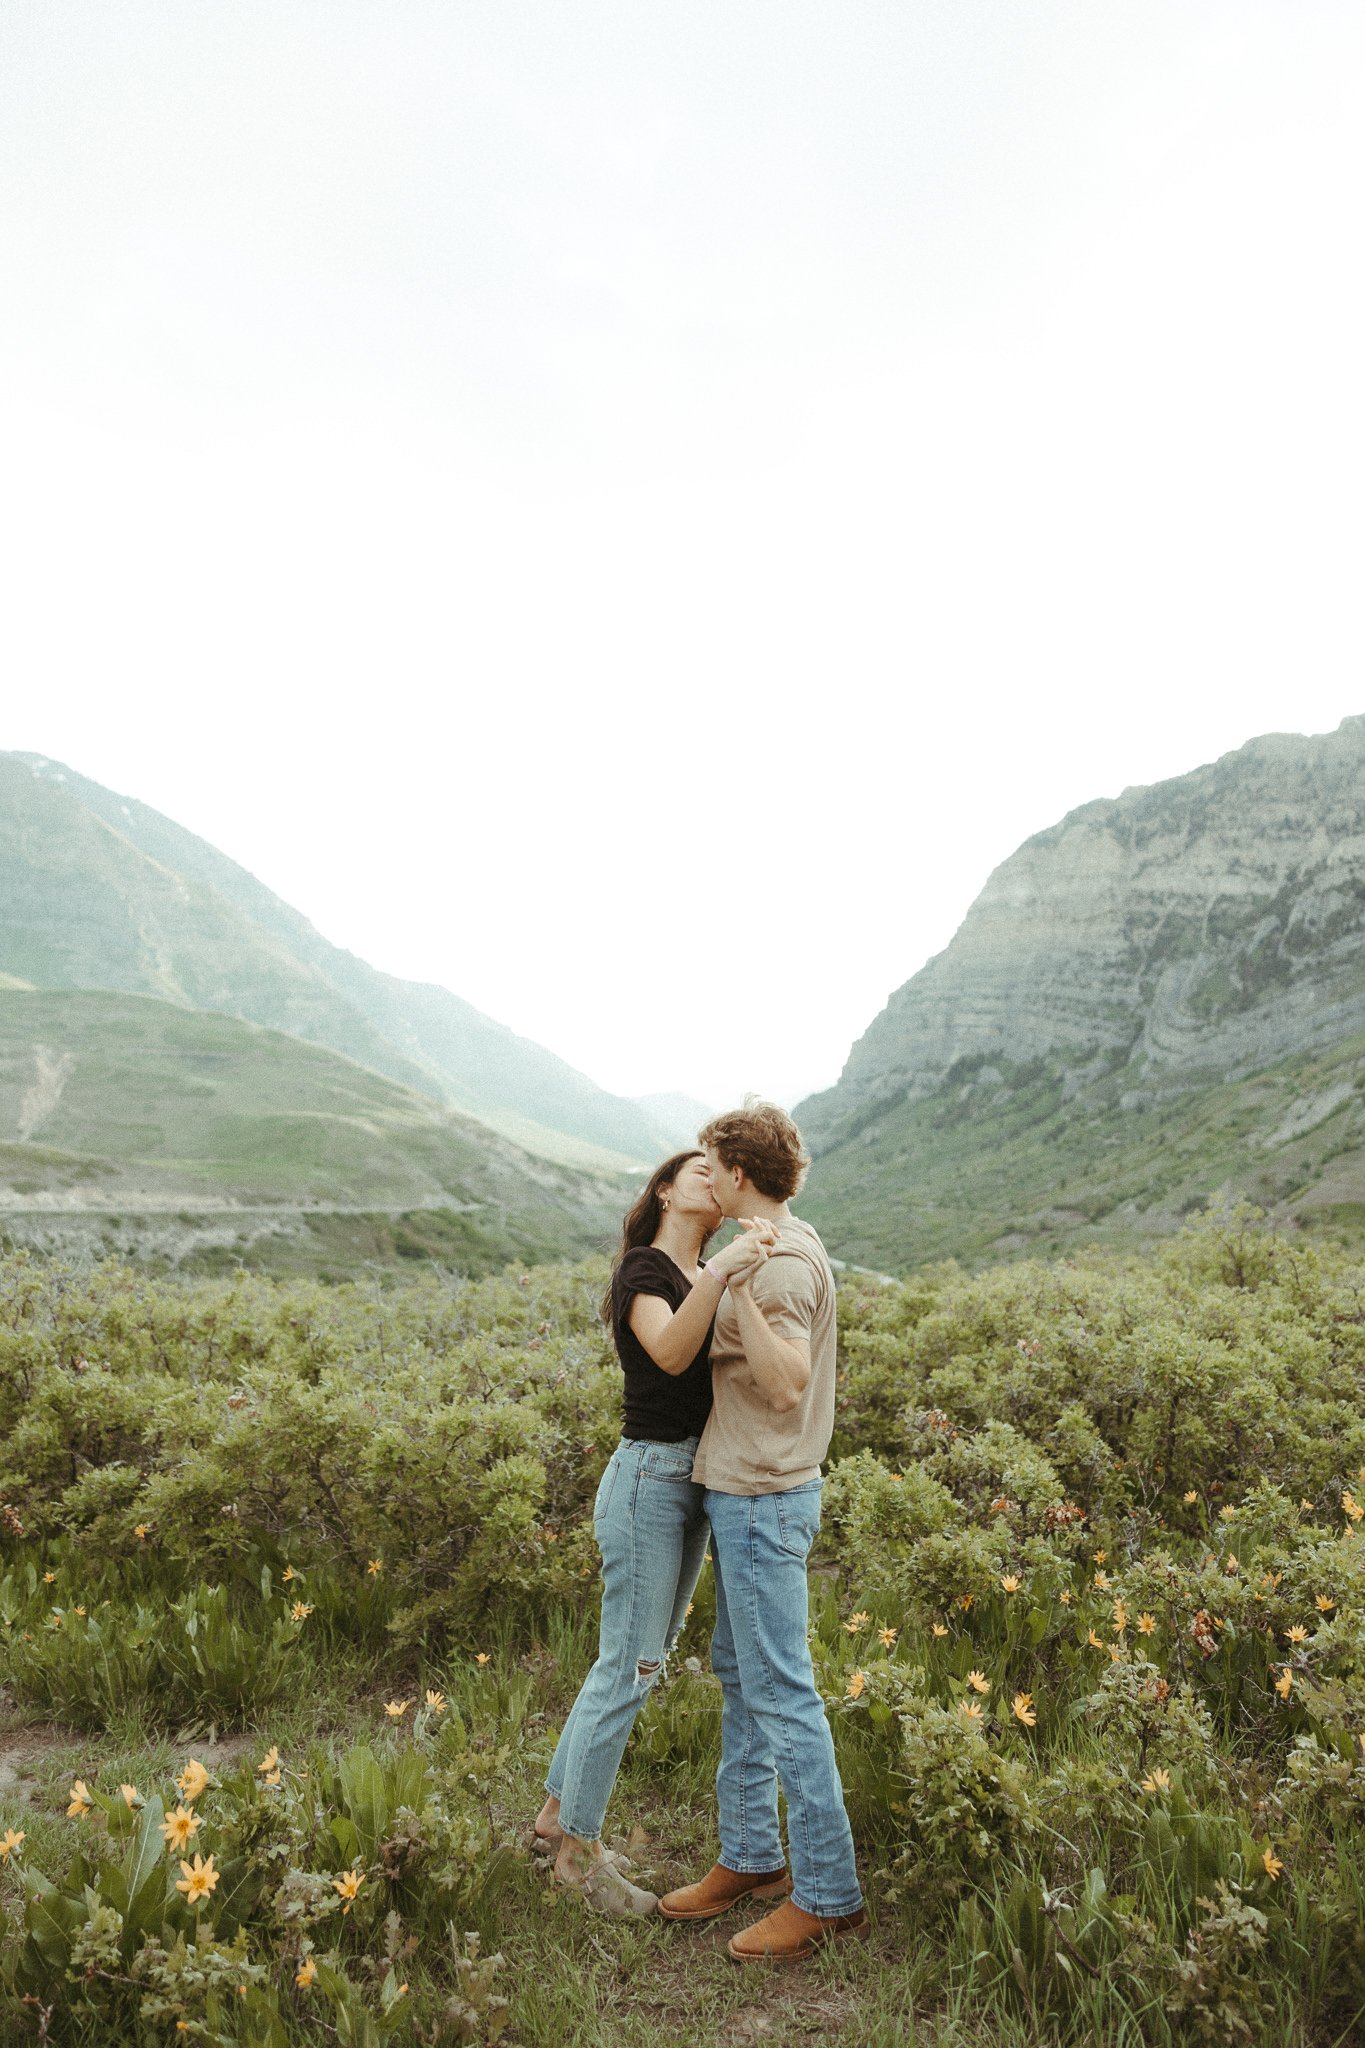 Spring-Provo-Canyon-Wildflowers-Engagement-Session-47